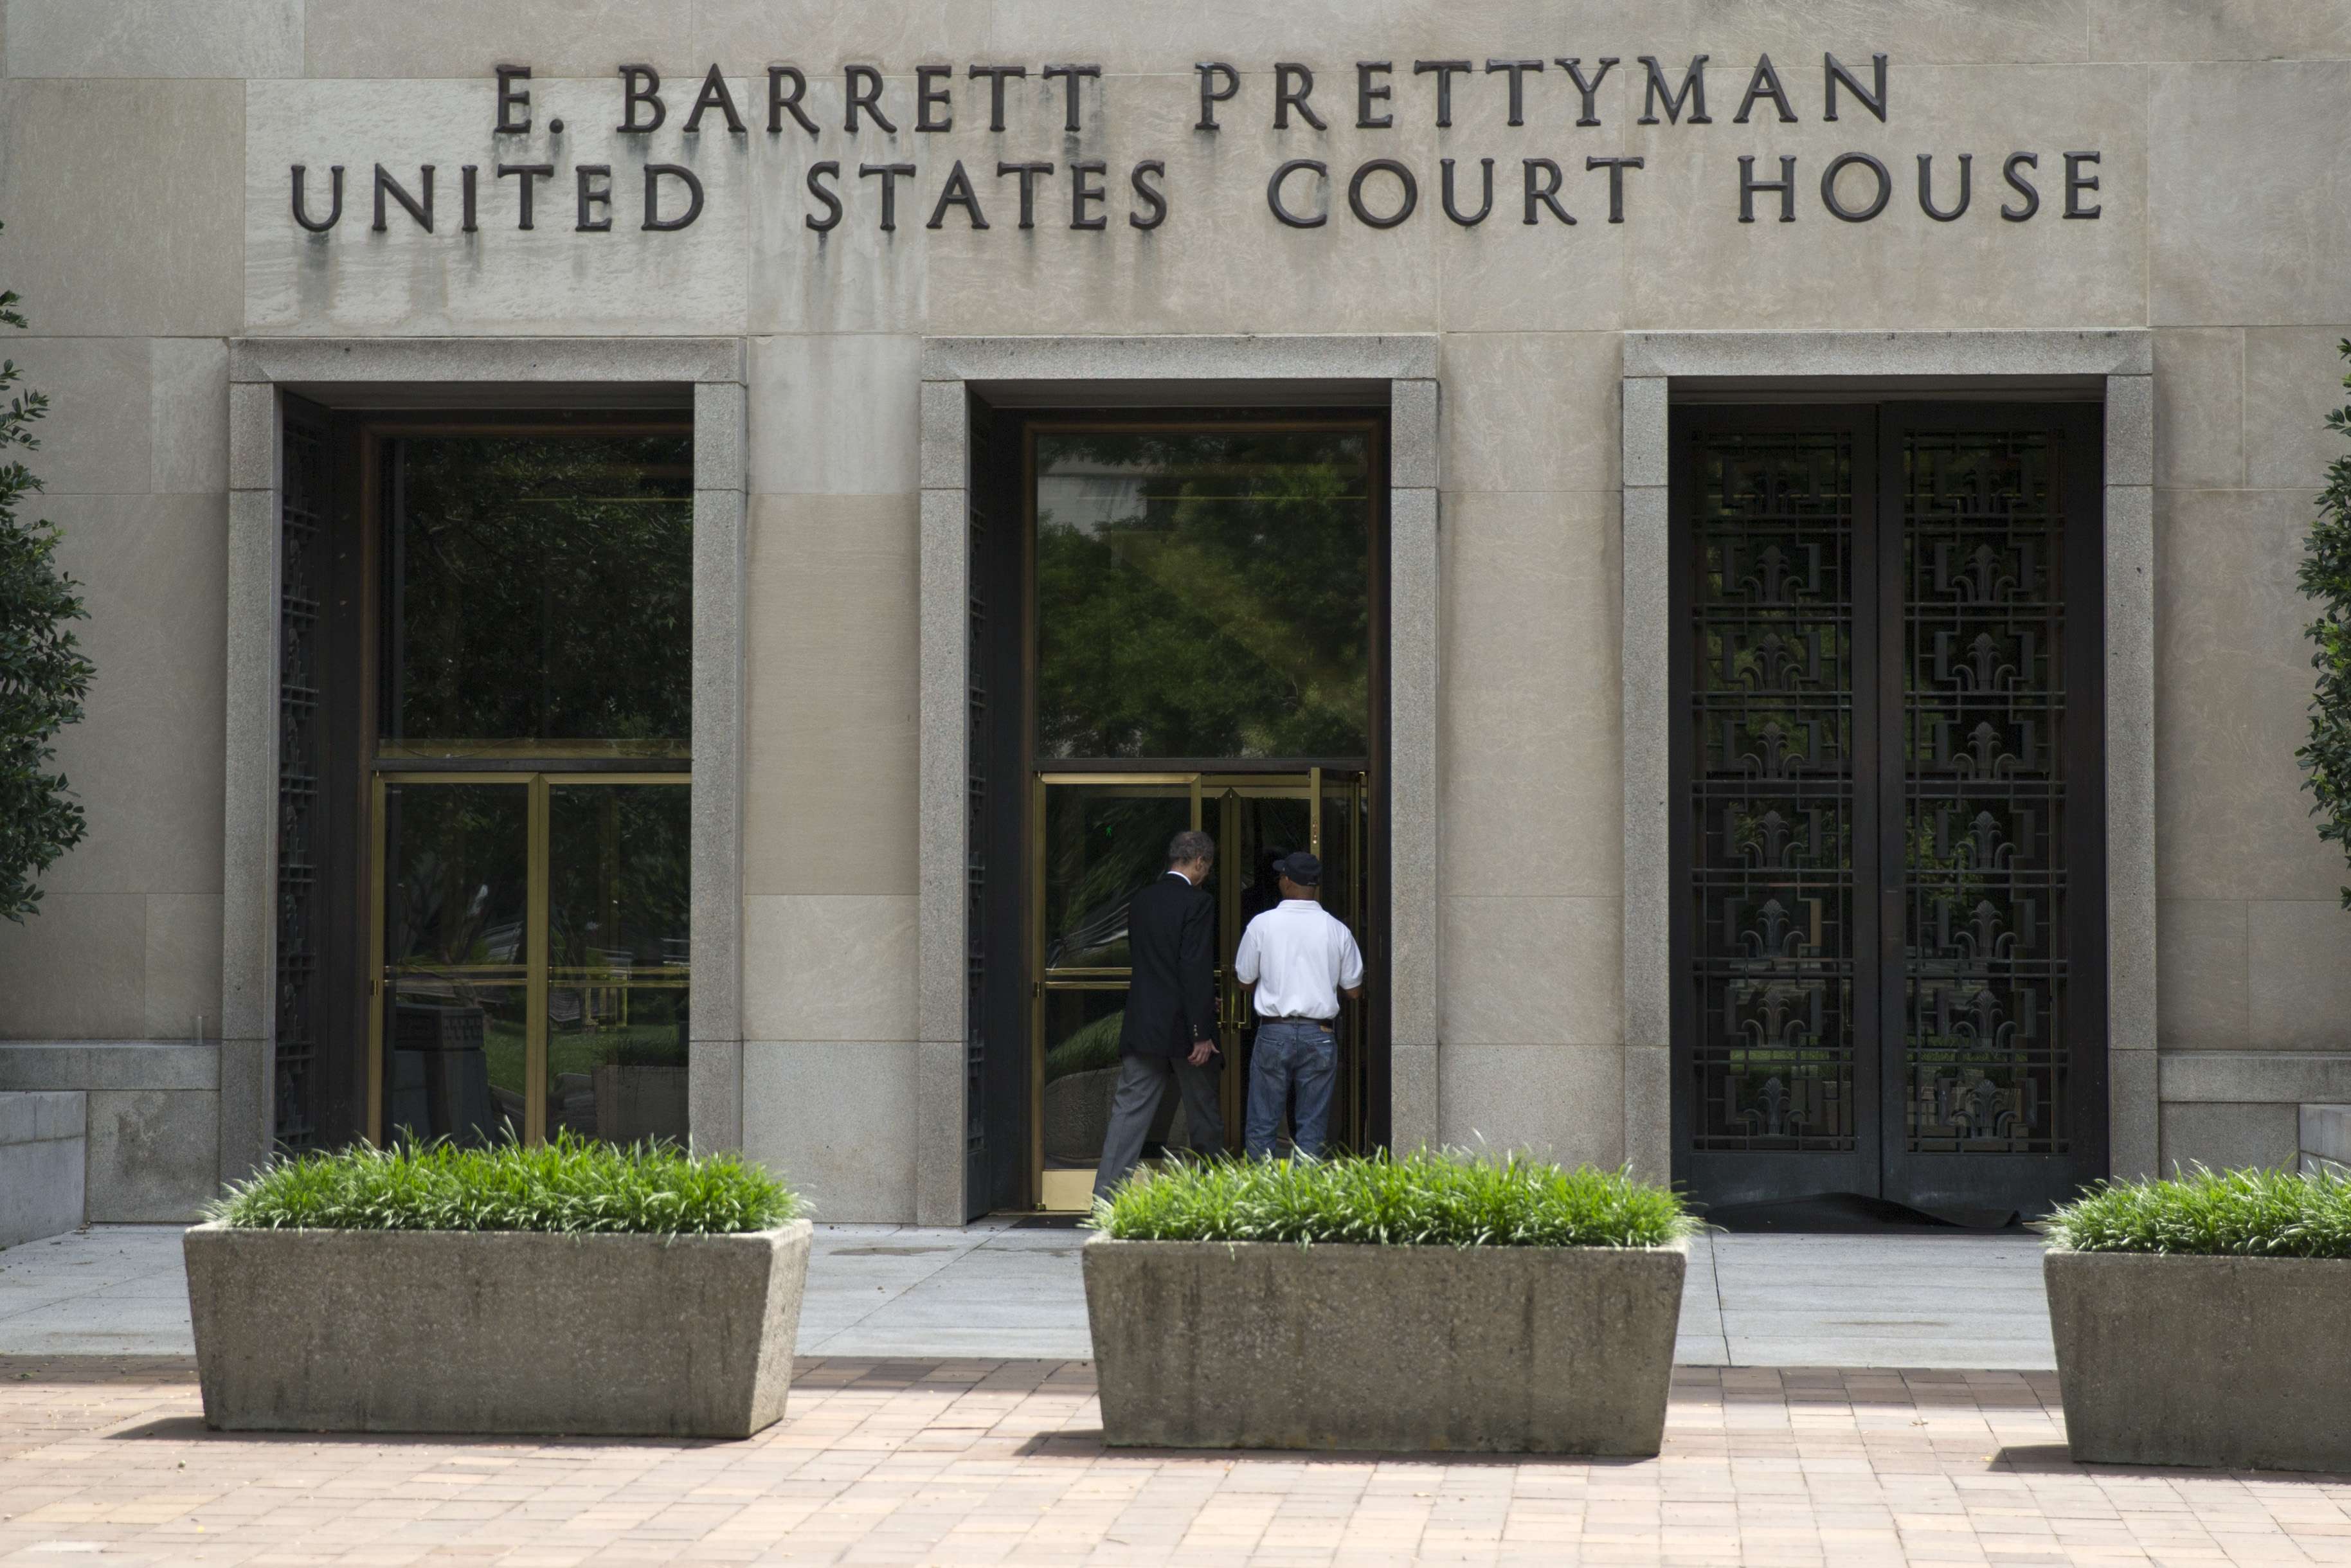 A view of the E. Barrett Prettyman Federal Courthouse that houses the U.S. Court of Appeals for the D.C. Circuit, on Tuesday, July 22, 2014, in Washington. Obama's health care law is enmeshed in another big legal battle after two federal appeals courts issued contradictory rulings on a key financing issue within hours of each other Tuesday. (AP Photo/ Evan Vucci)